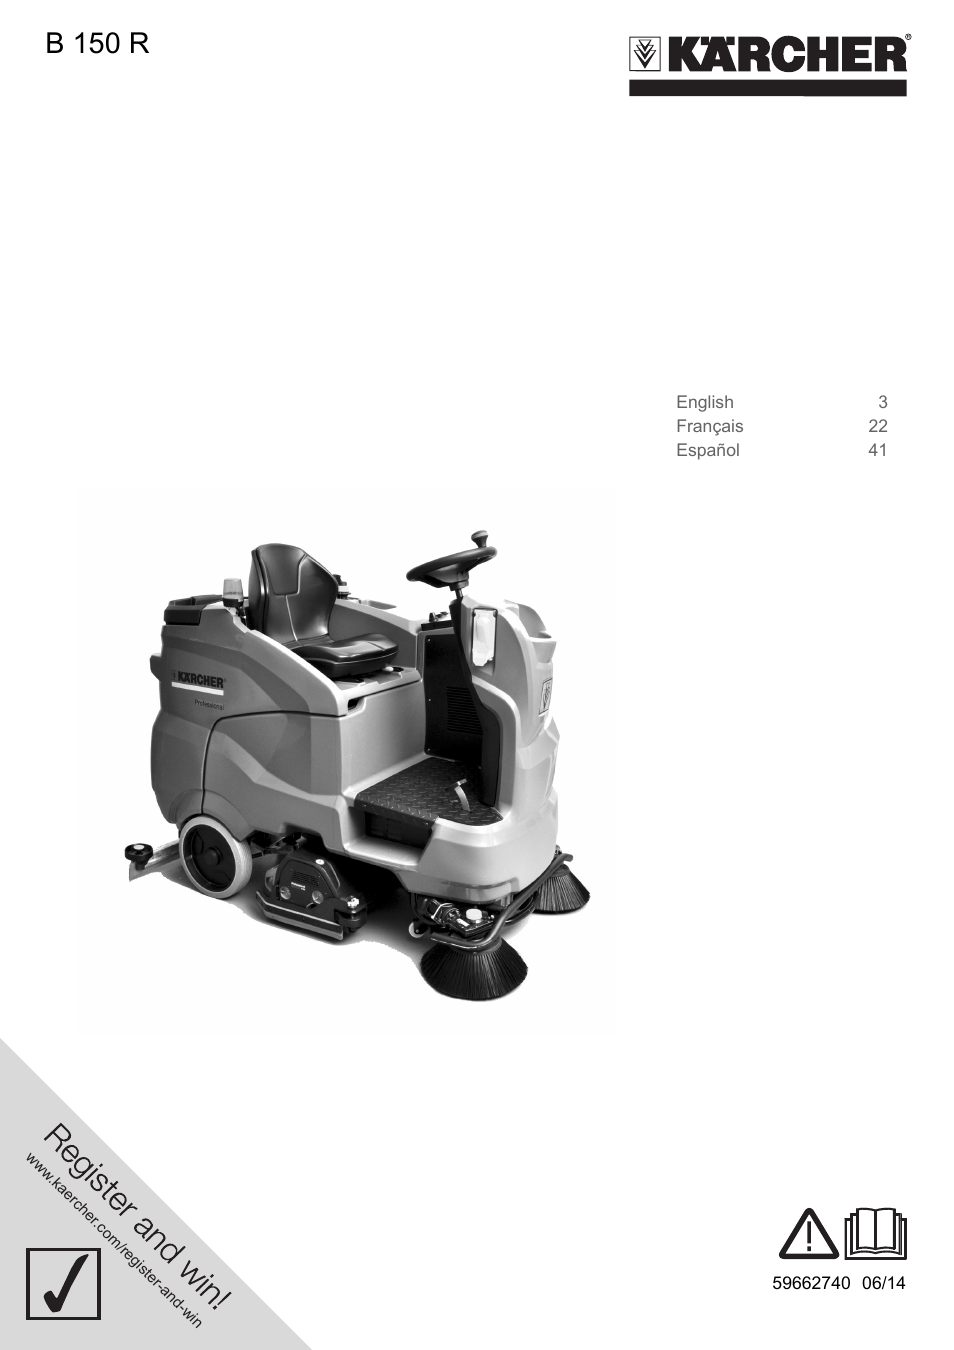 Karcher B 150 R User Manual | 60 pages | Also for: Autolaveuse B 150 R  Advanced + R 75, Autolaveuse B 150 R + R 90, Autolaveuse B 150 R + D 75,  Autolaveuse B 150 R Advanced + R 90, Autolaveuse B 150 R + D 90,  Autolaveuse B 150 R Advanced + D ...